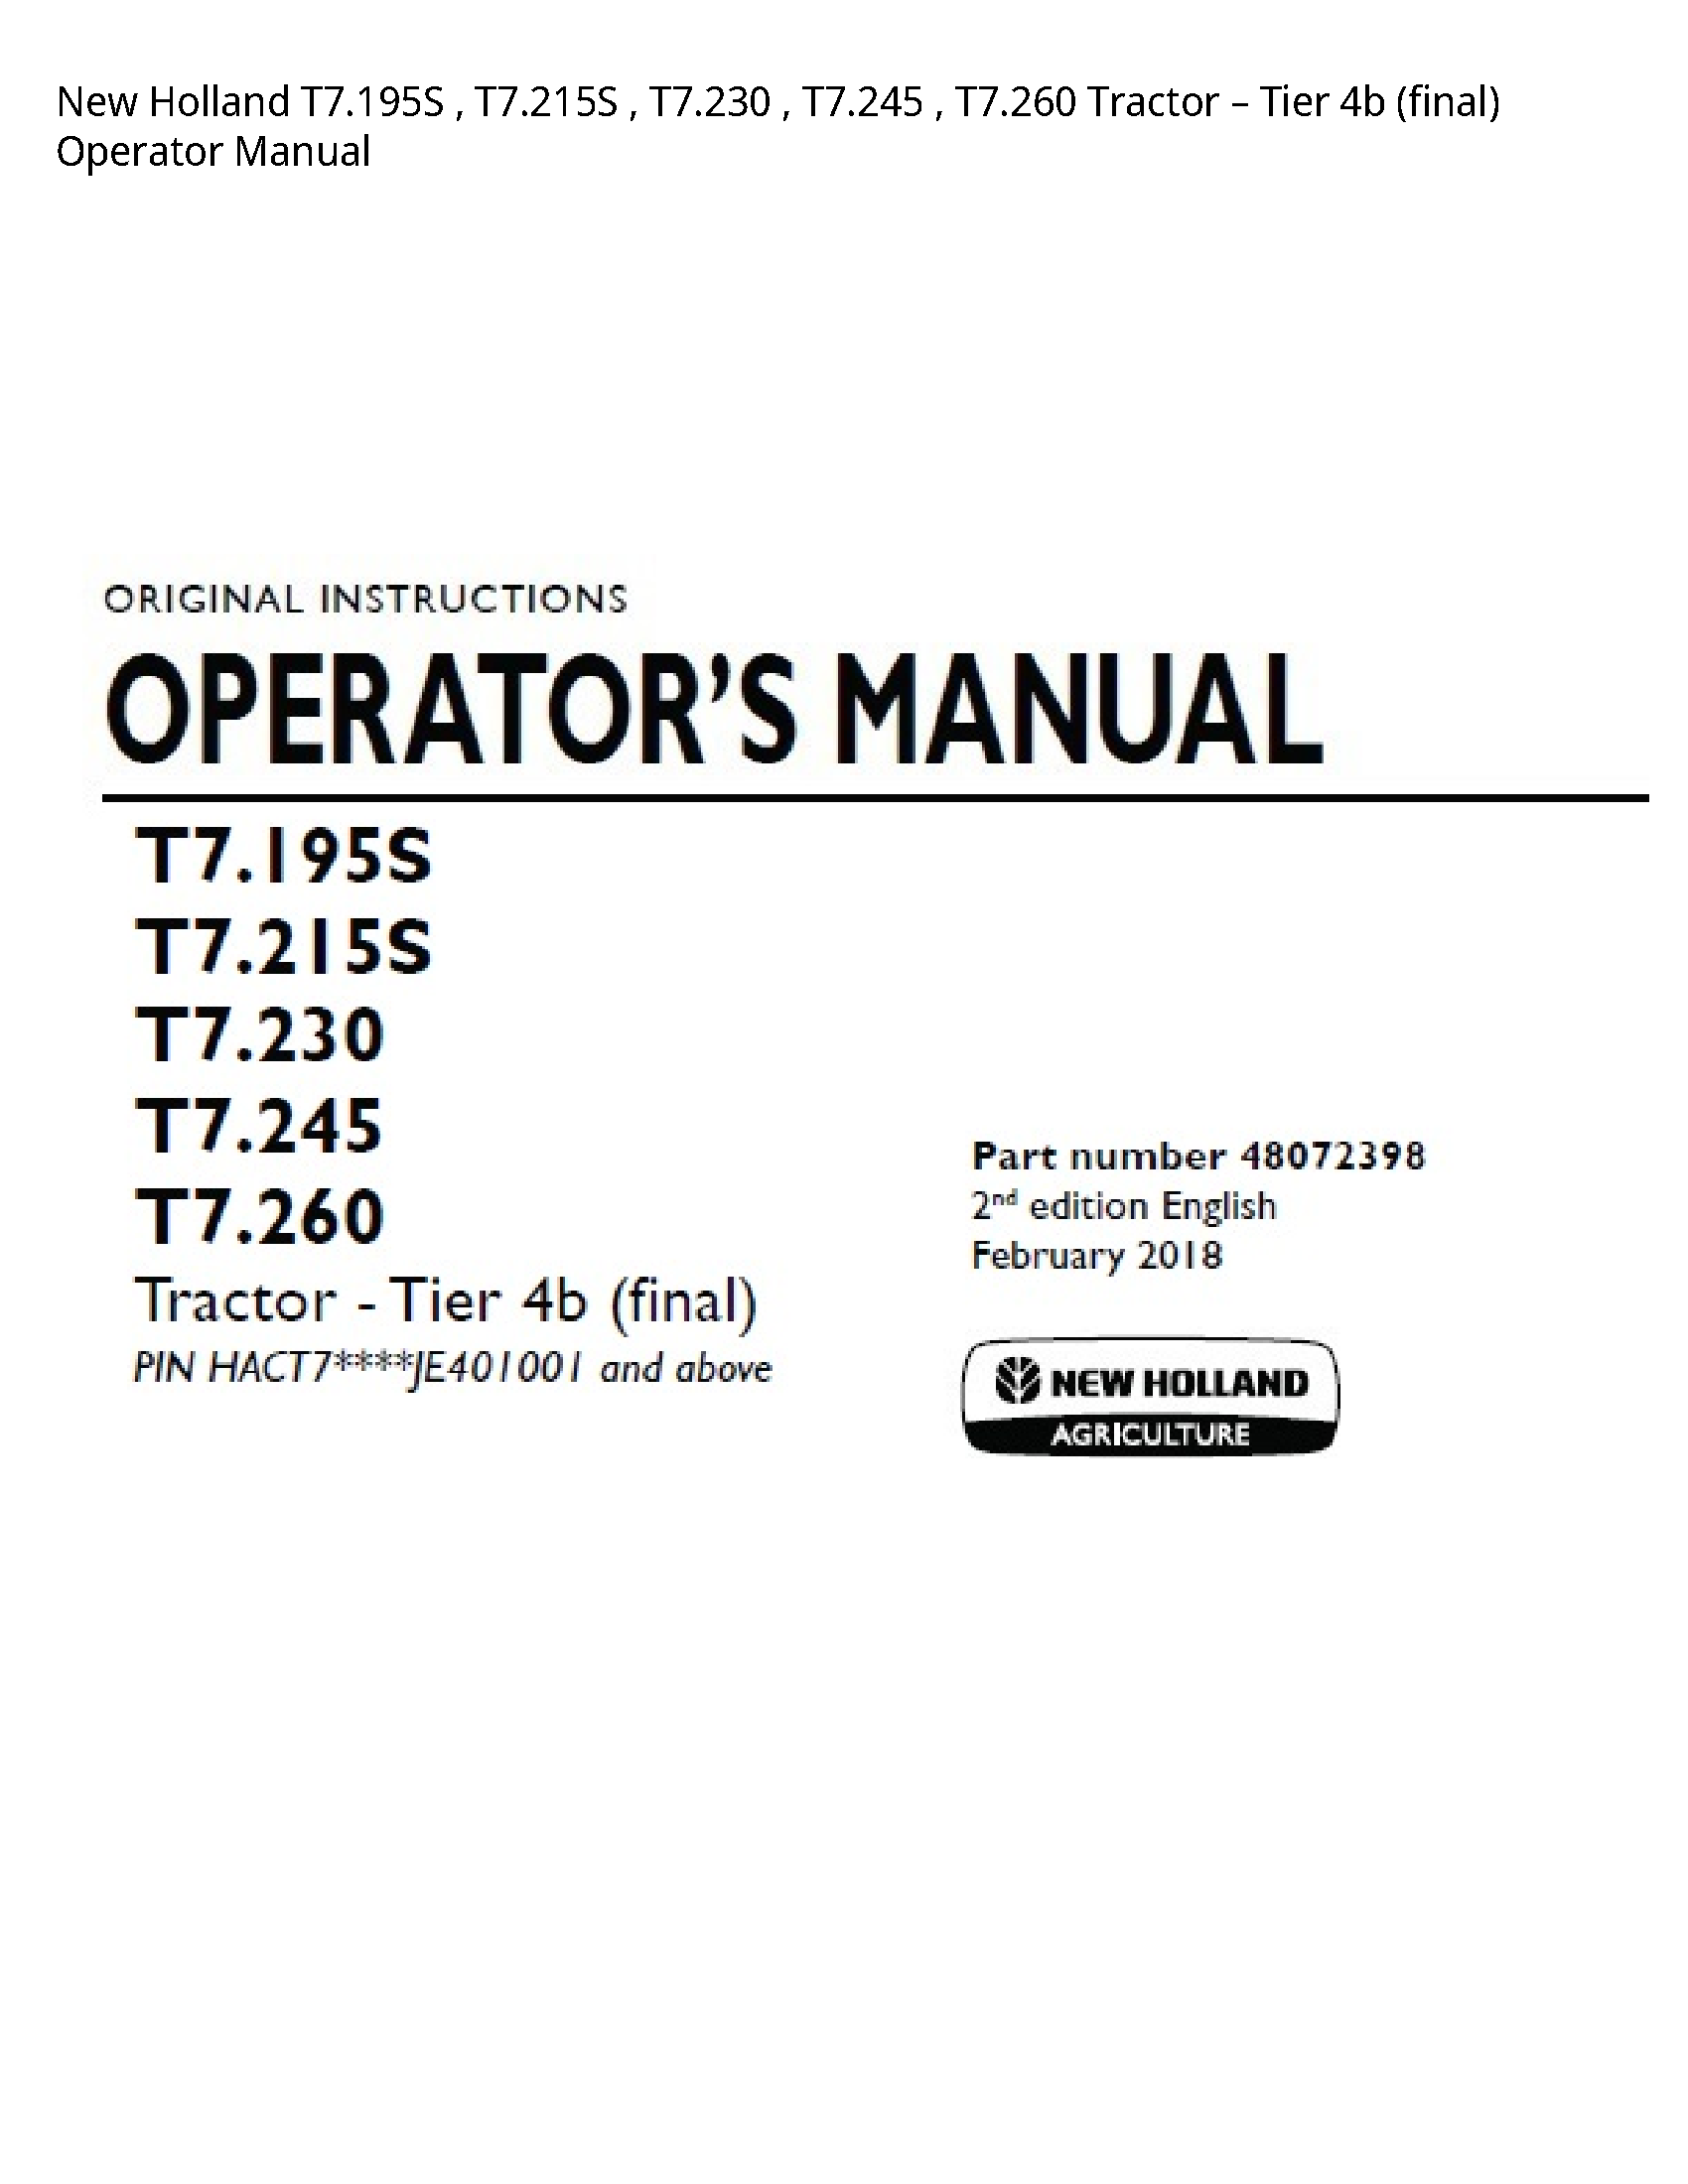 New Holland T7.195S Tractor Tier (final) Operator manual